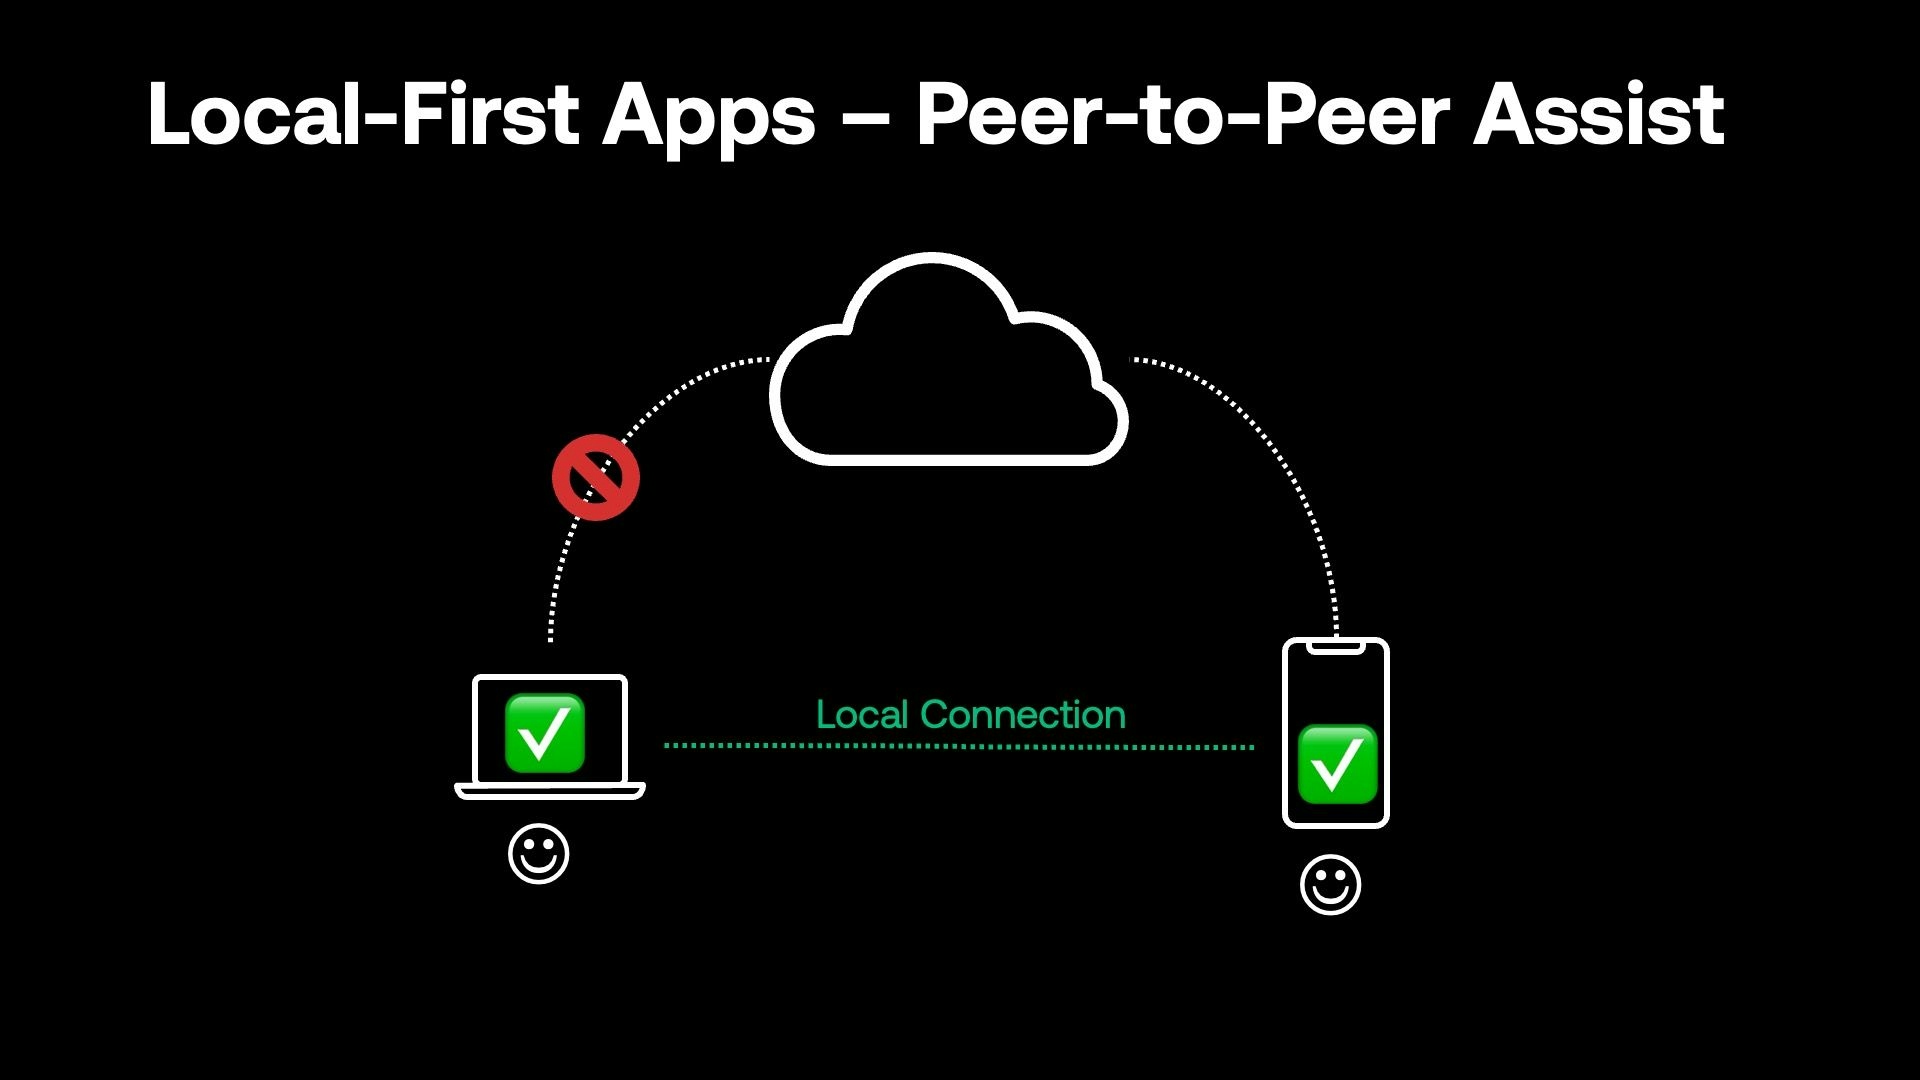 local-first apps can unlock real-time peer-to-peer with bluetooth low energy